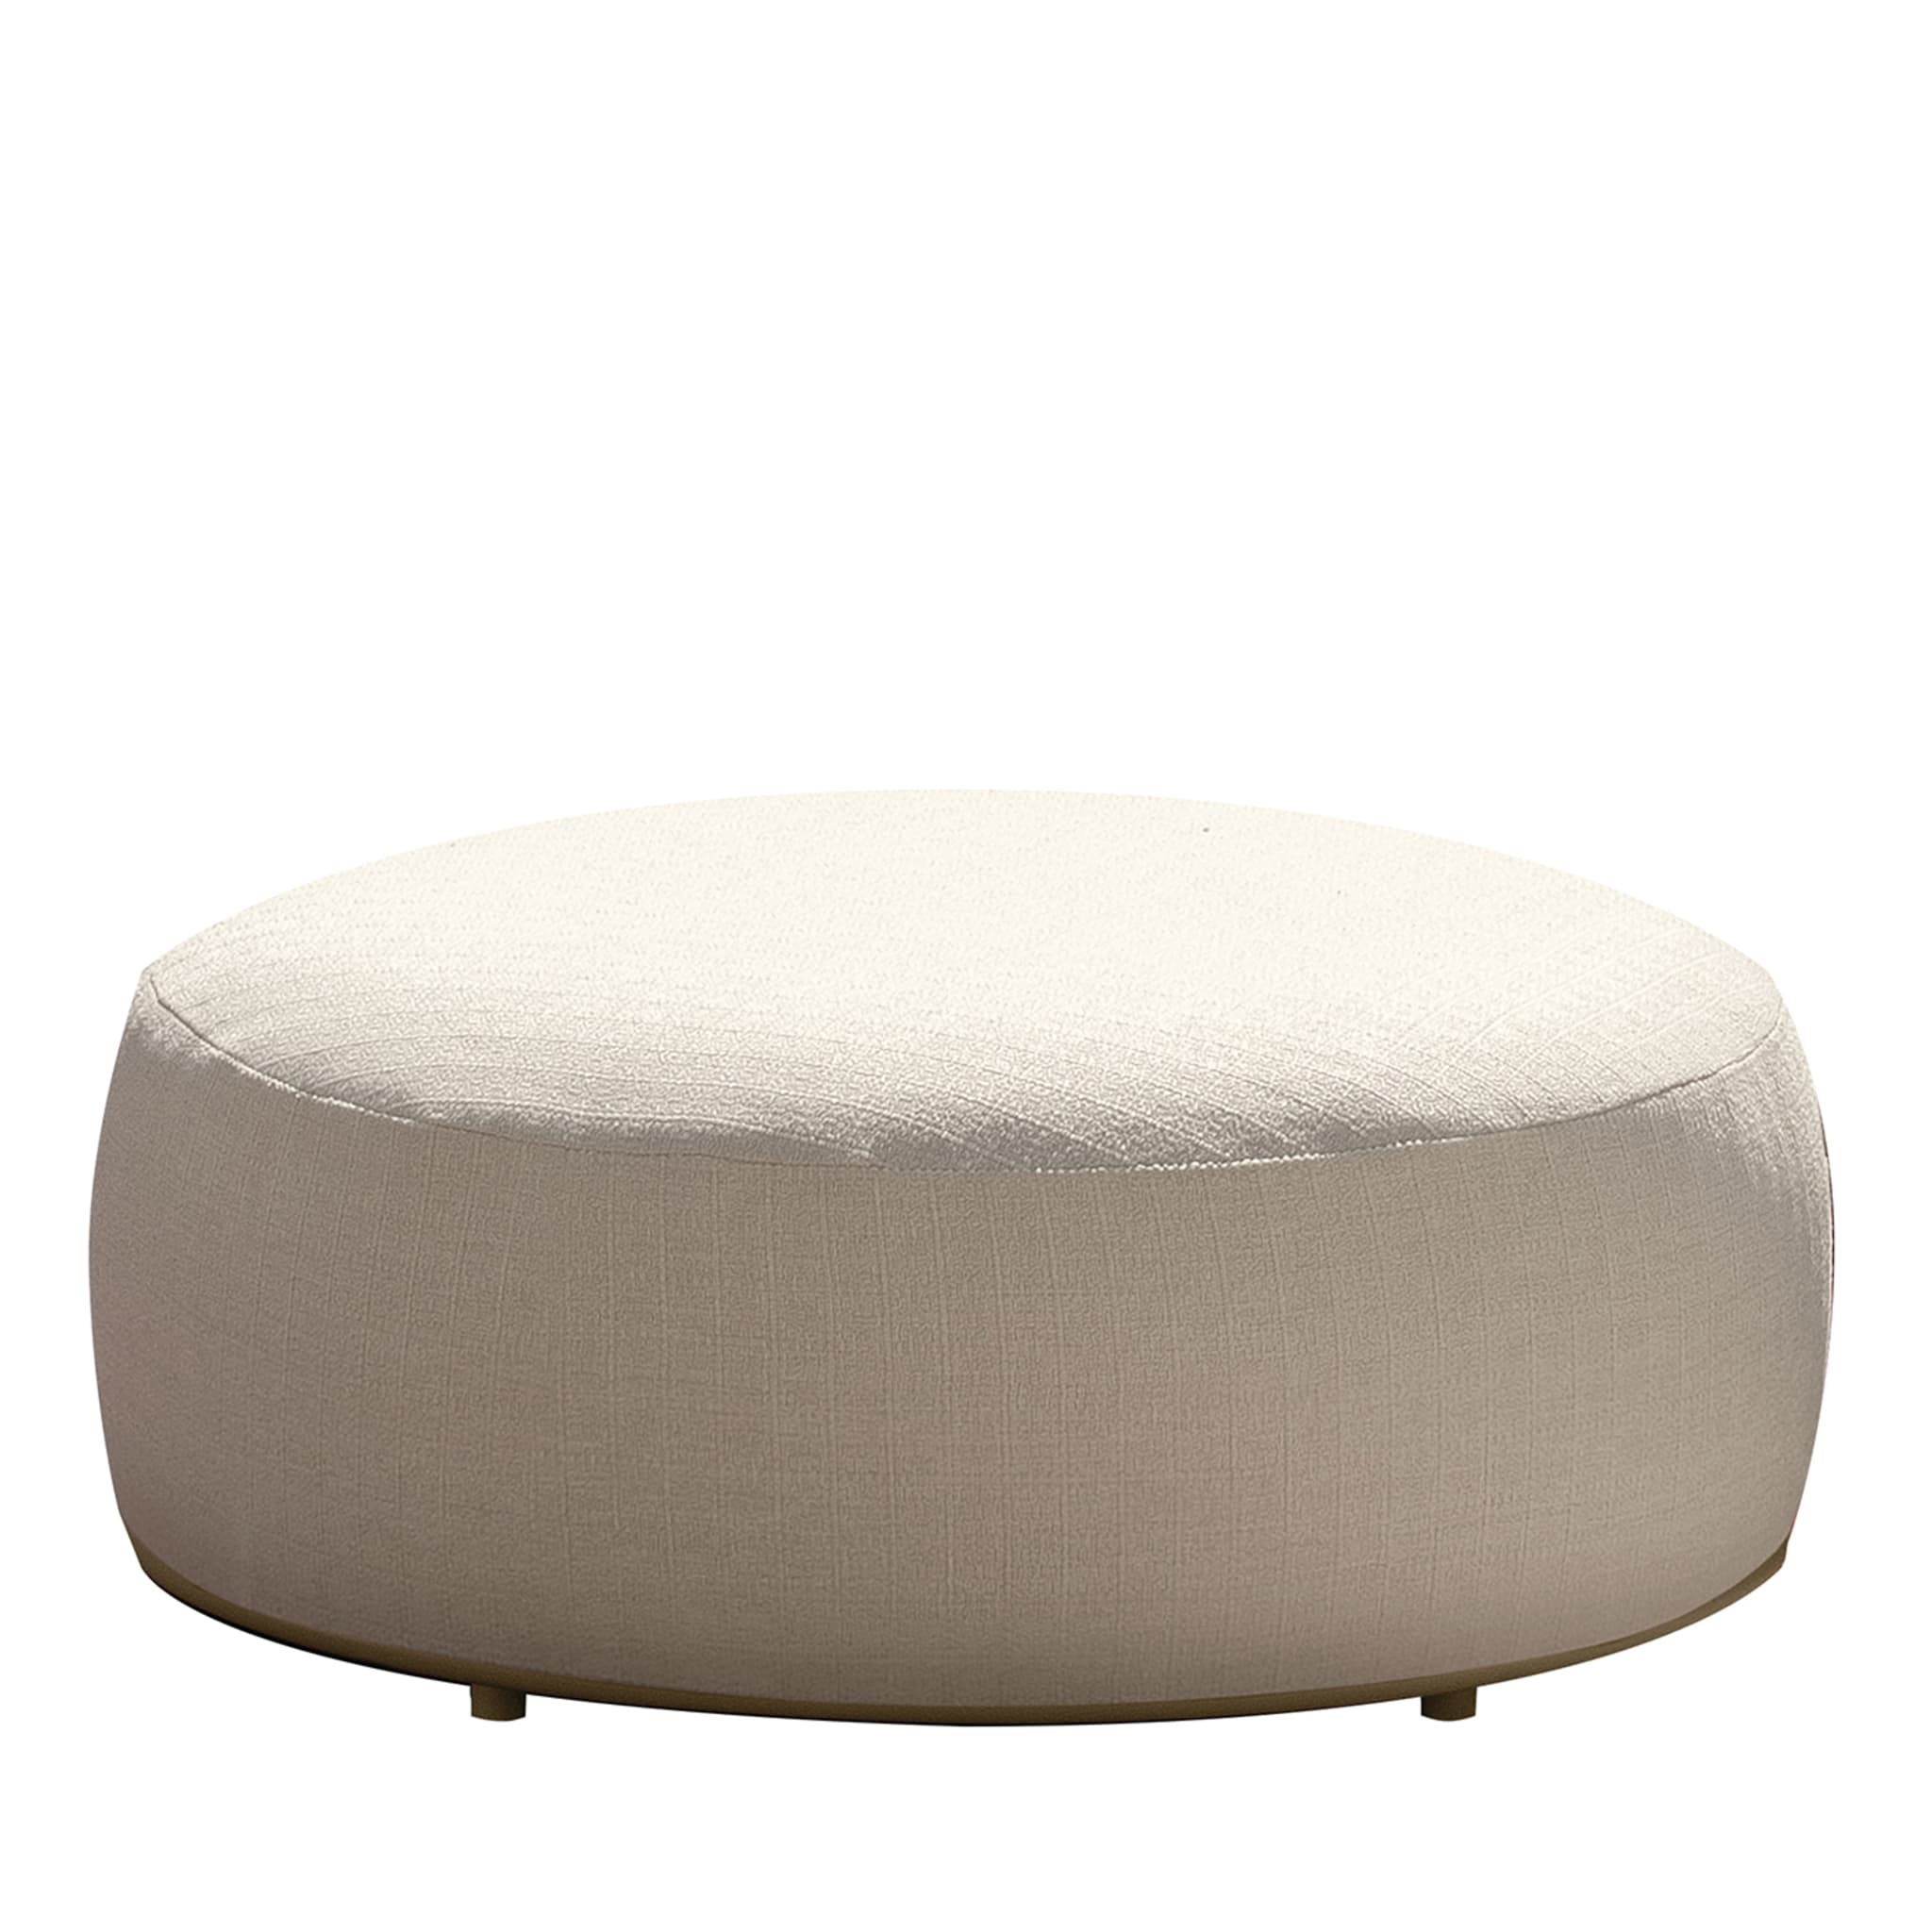 Scacco Round White Pouf by Ludovica & Roberto Palomba - Main view